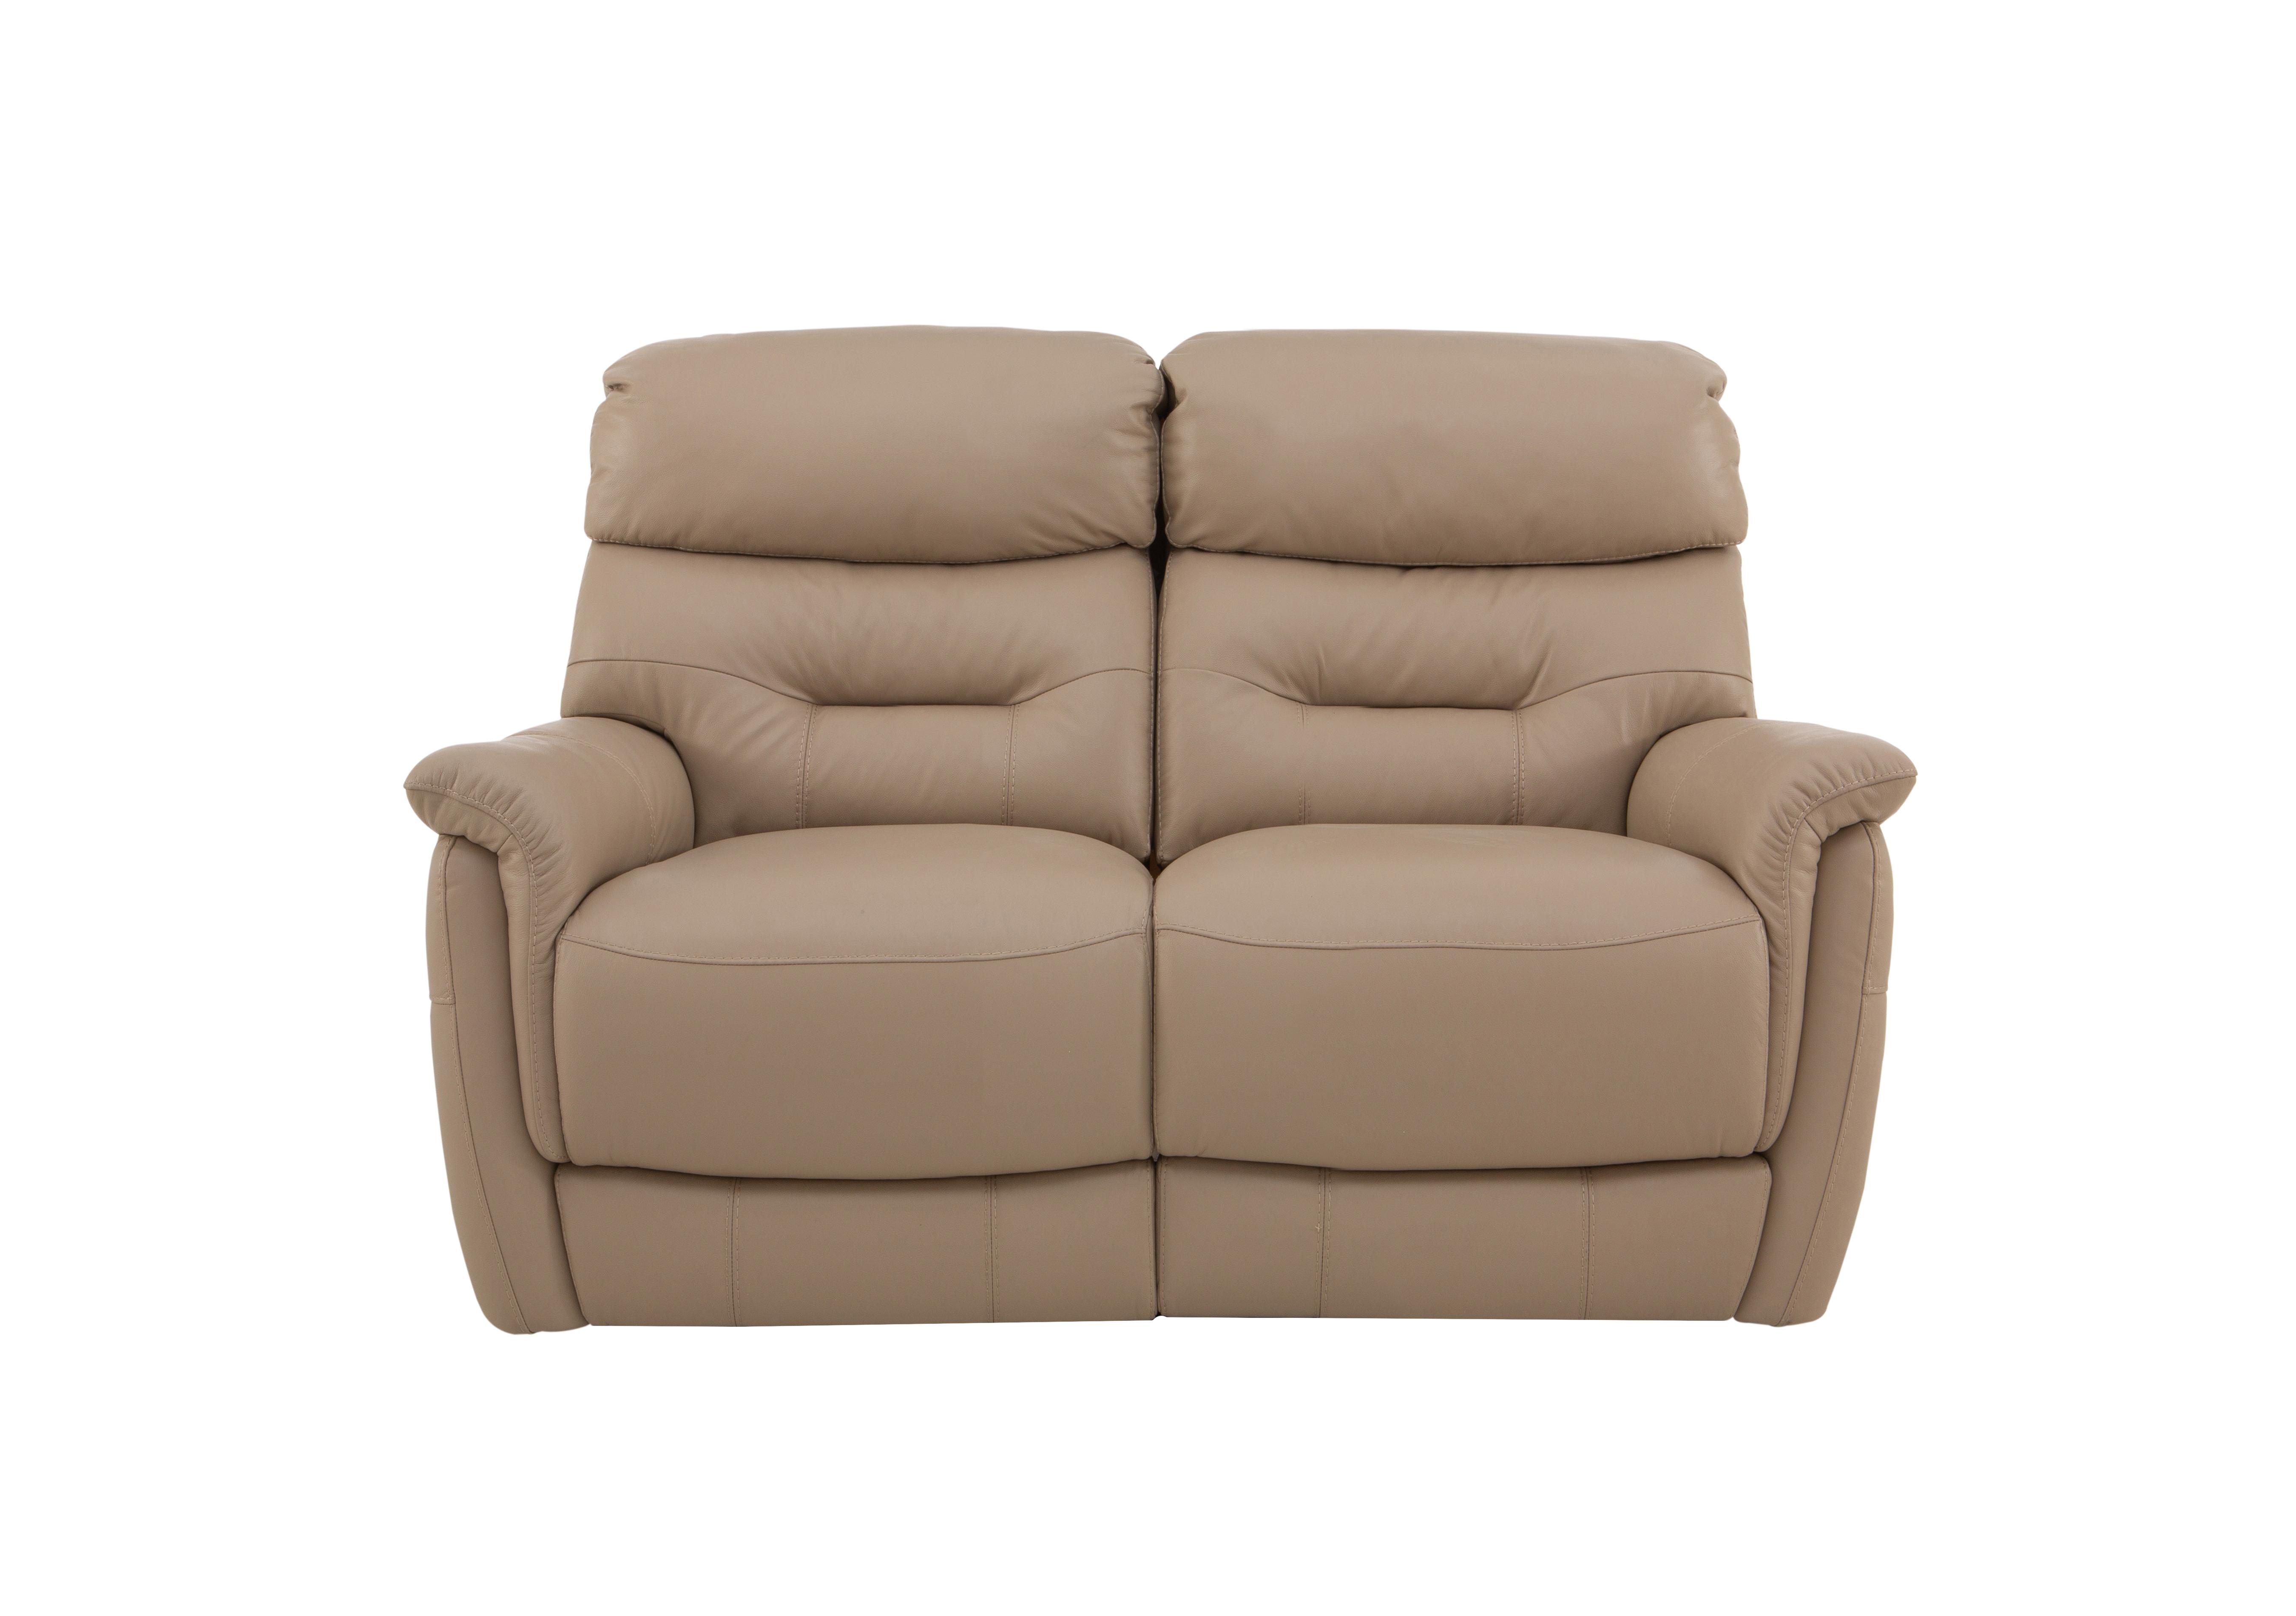 Chicago 2 Seater Leather Sofa in Bv-039c Pebble on Furniture Village